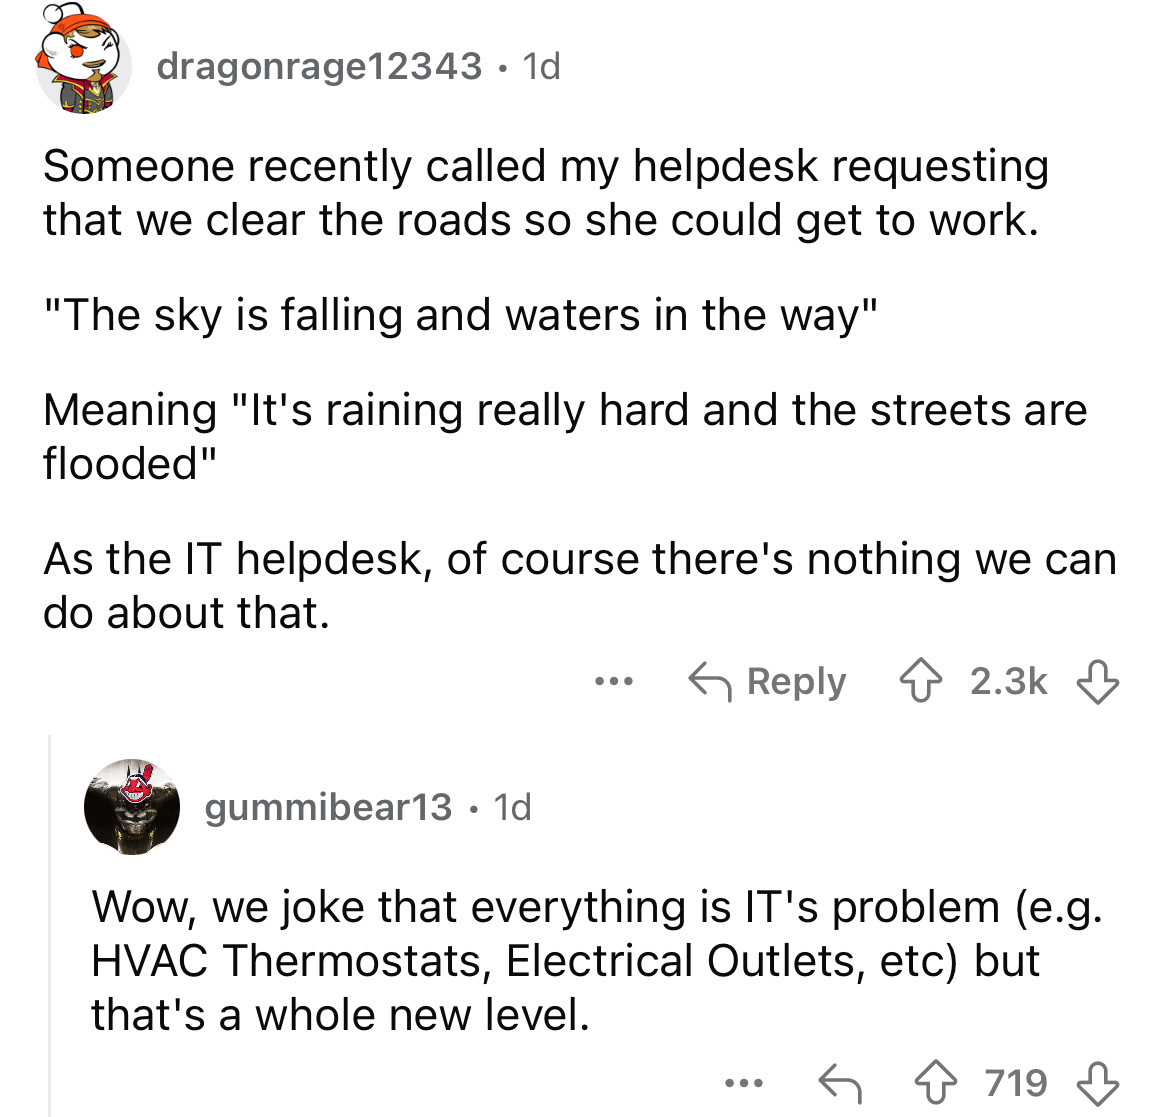 screenshot - dragonrage12343 1d . Someone recently called my helpdesk requesting that we clear the roads so she could get to work. "The sky is falling and waters in the way" Meaning "It's raining really hard and the streets are flooded" As the It helpdesk